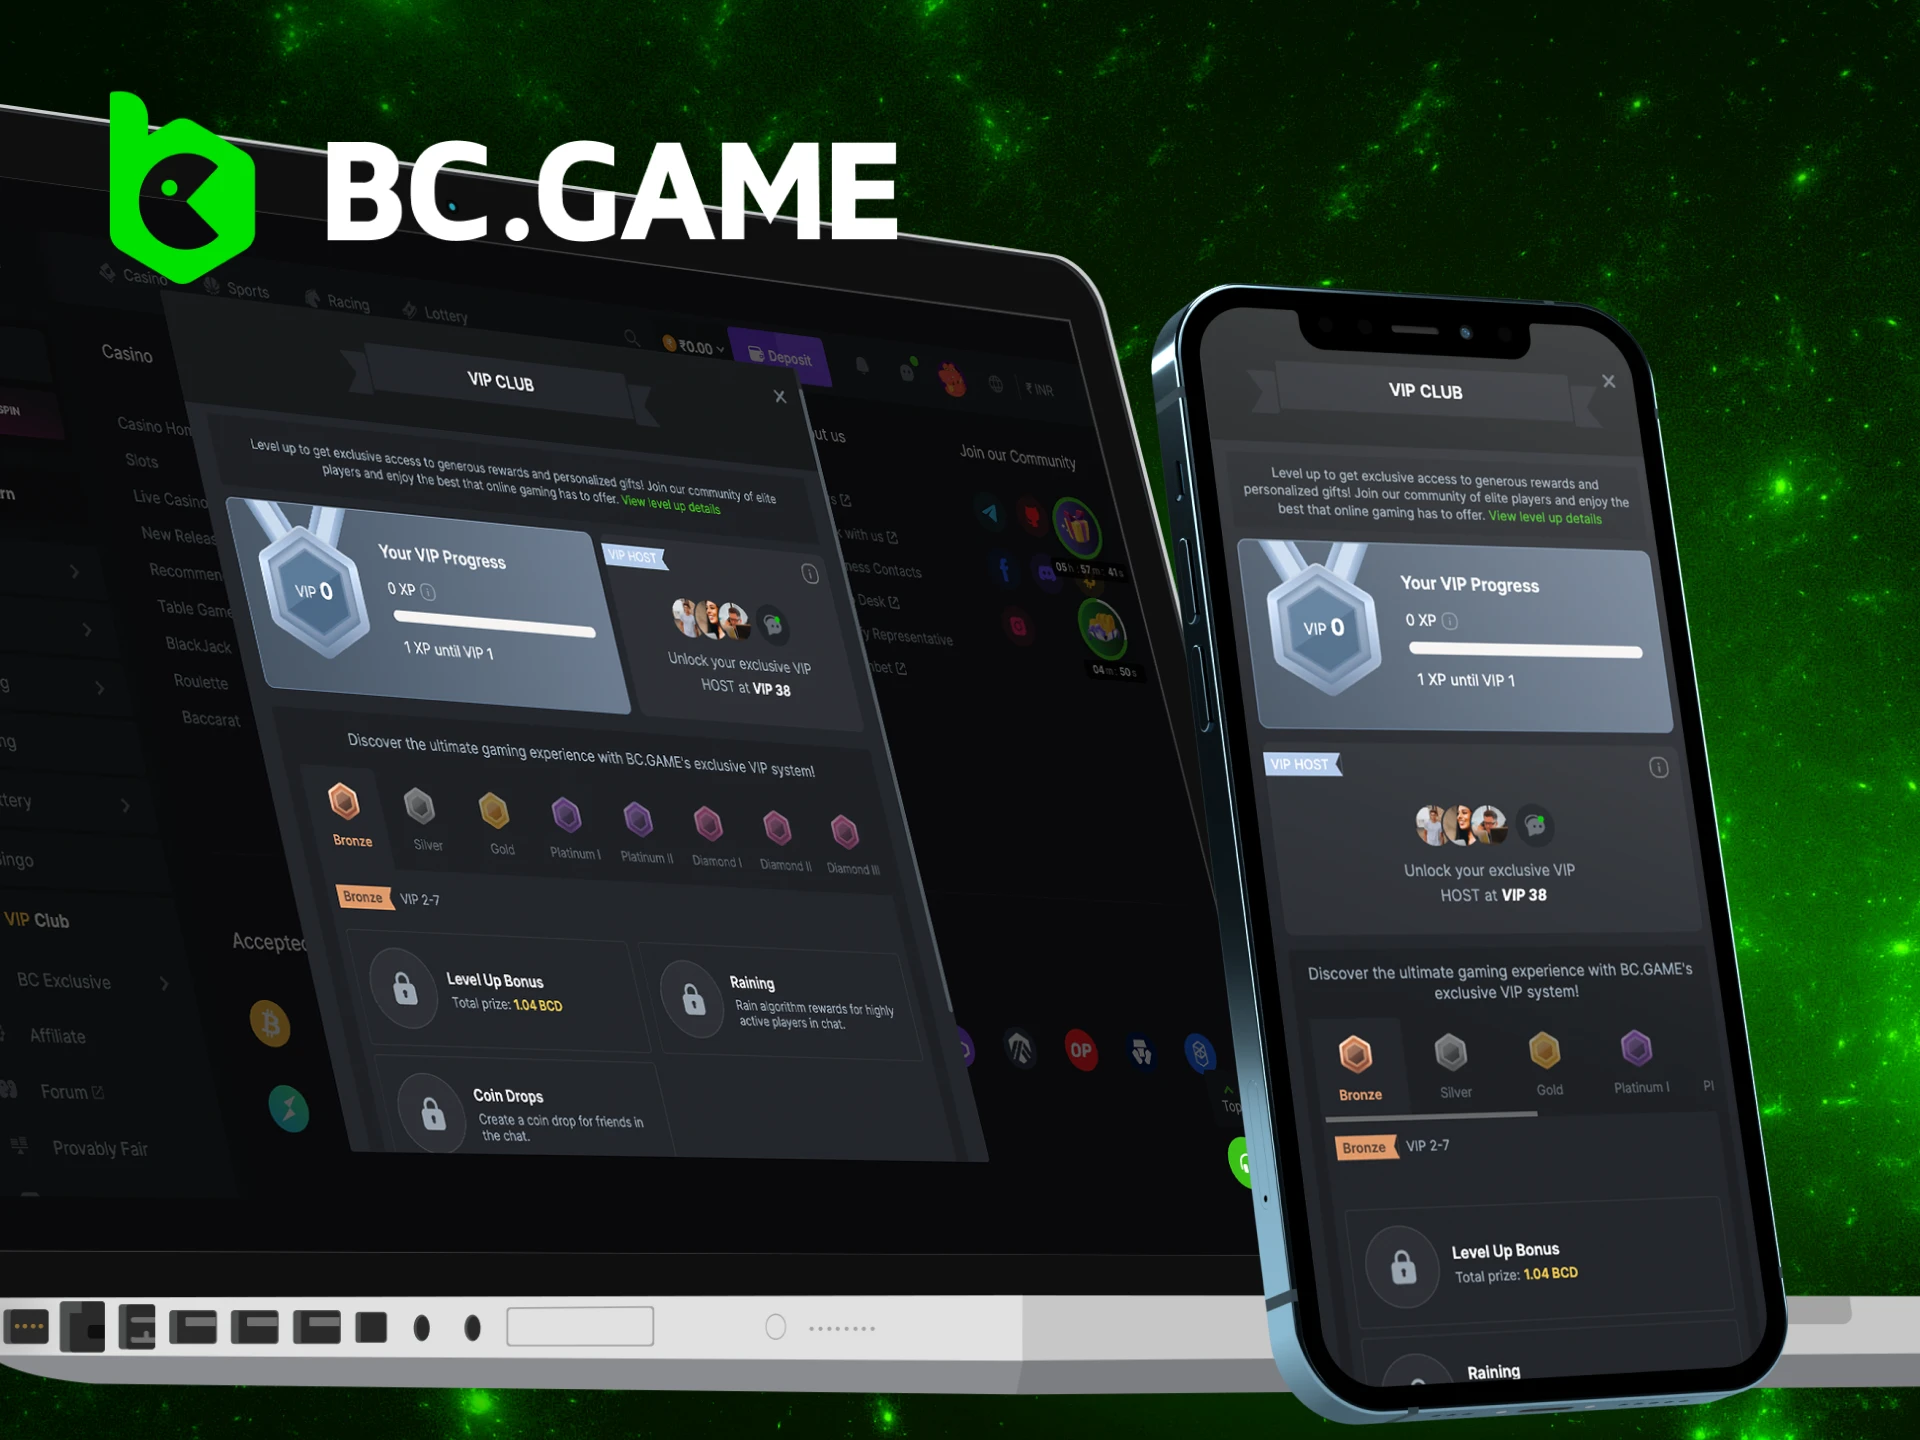 What are the VIP levels on the BC Game website.